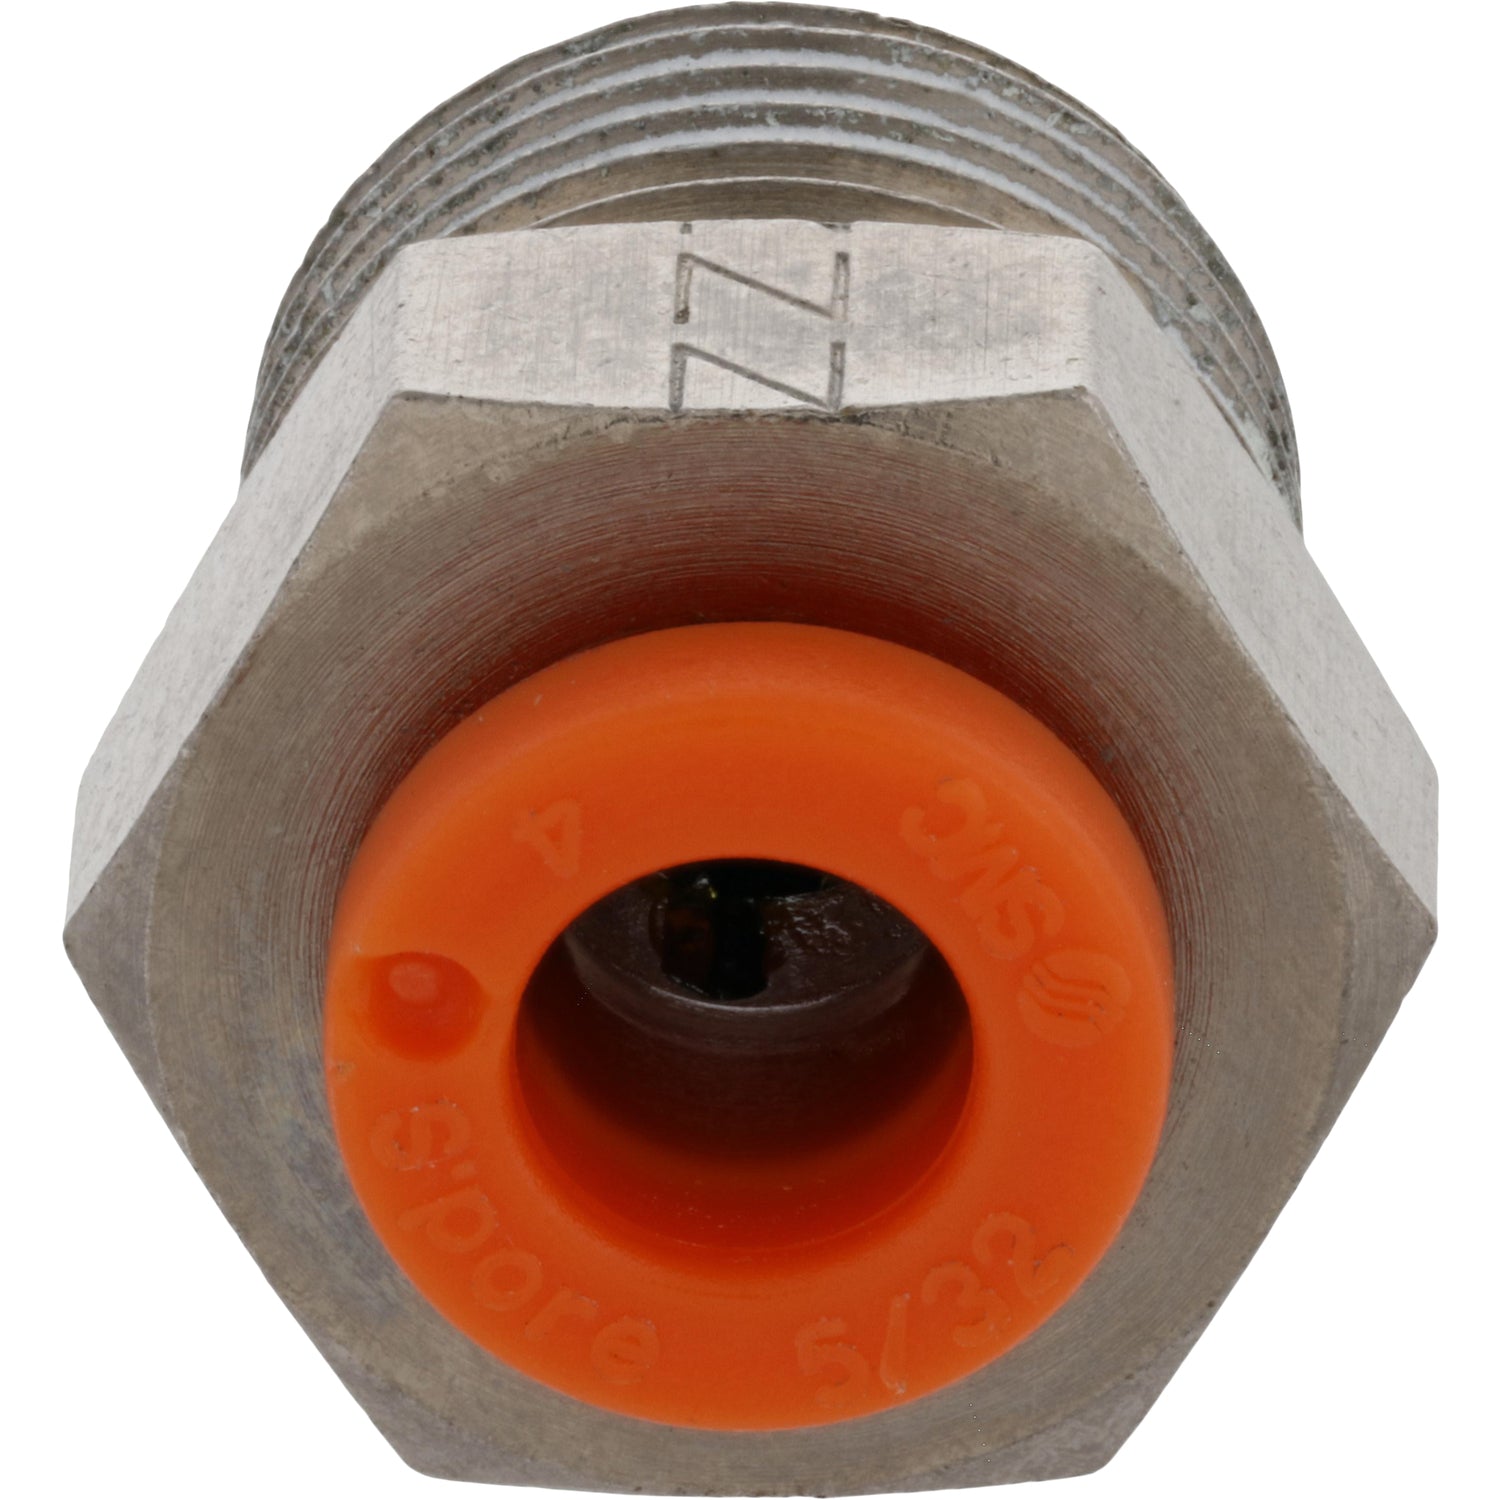 Brass threaded connector with orange plastic collar on white background. 